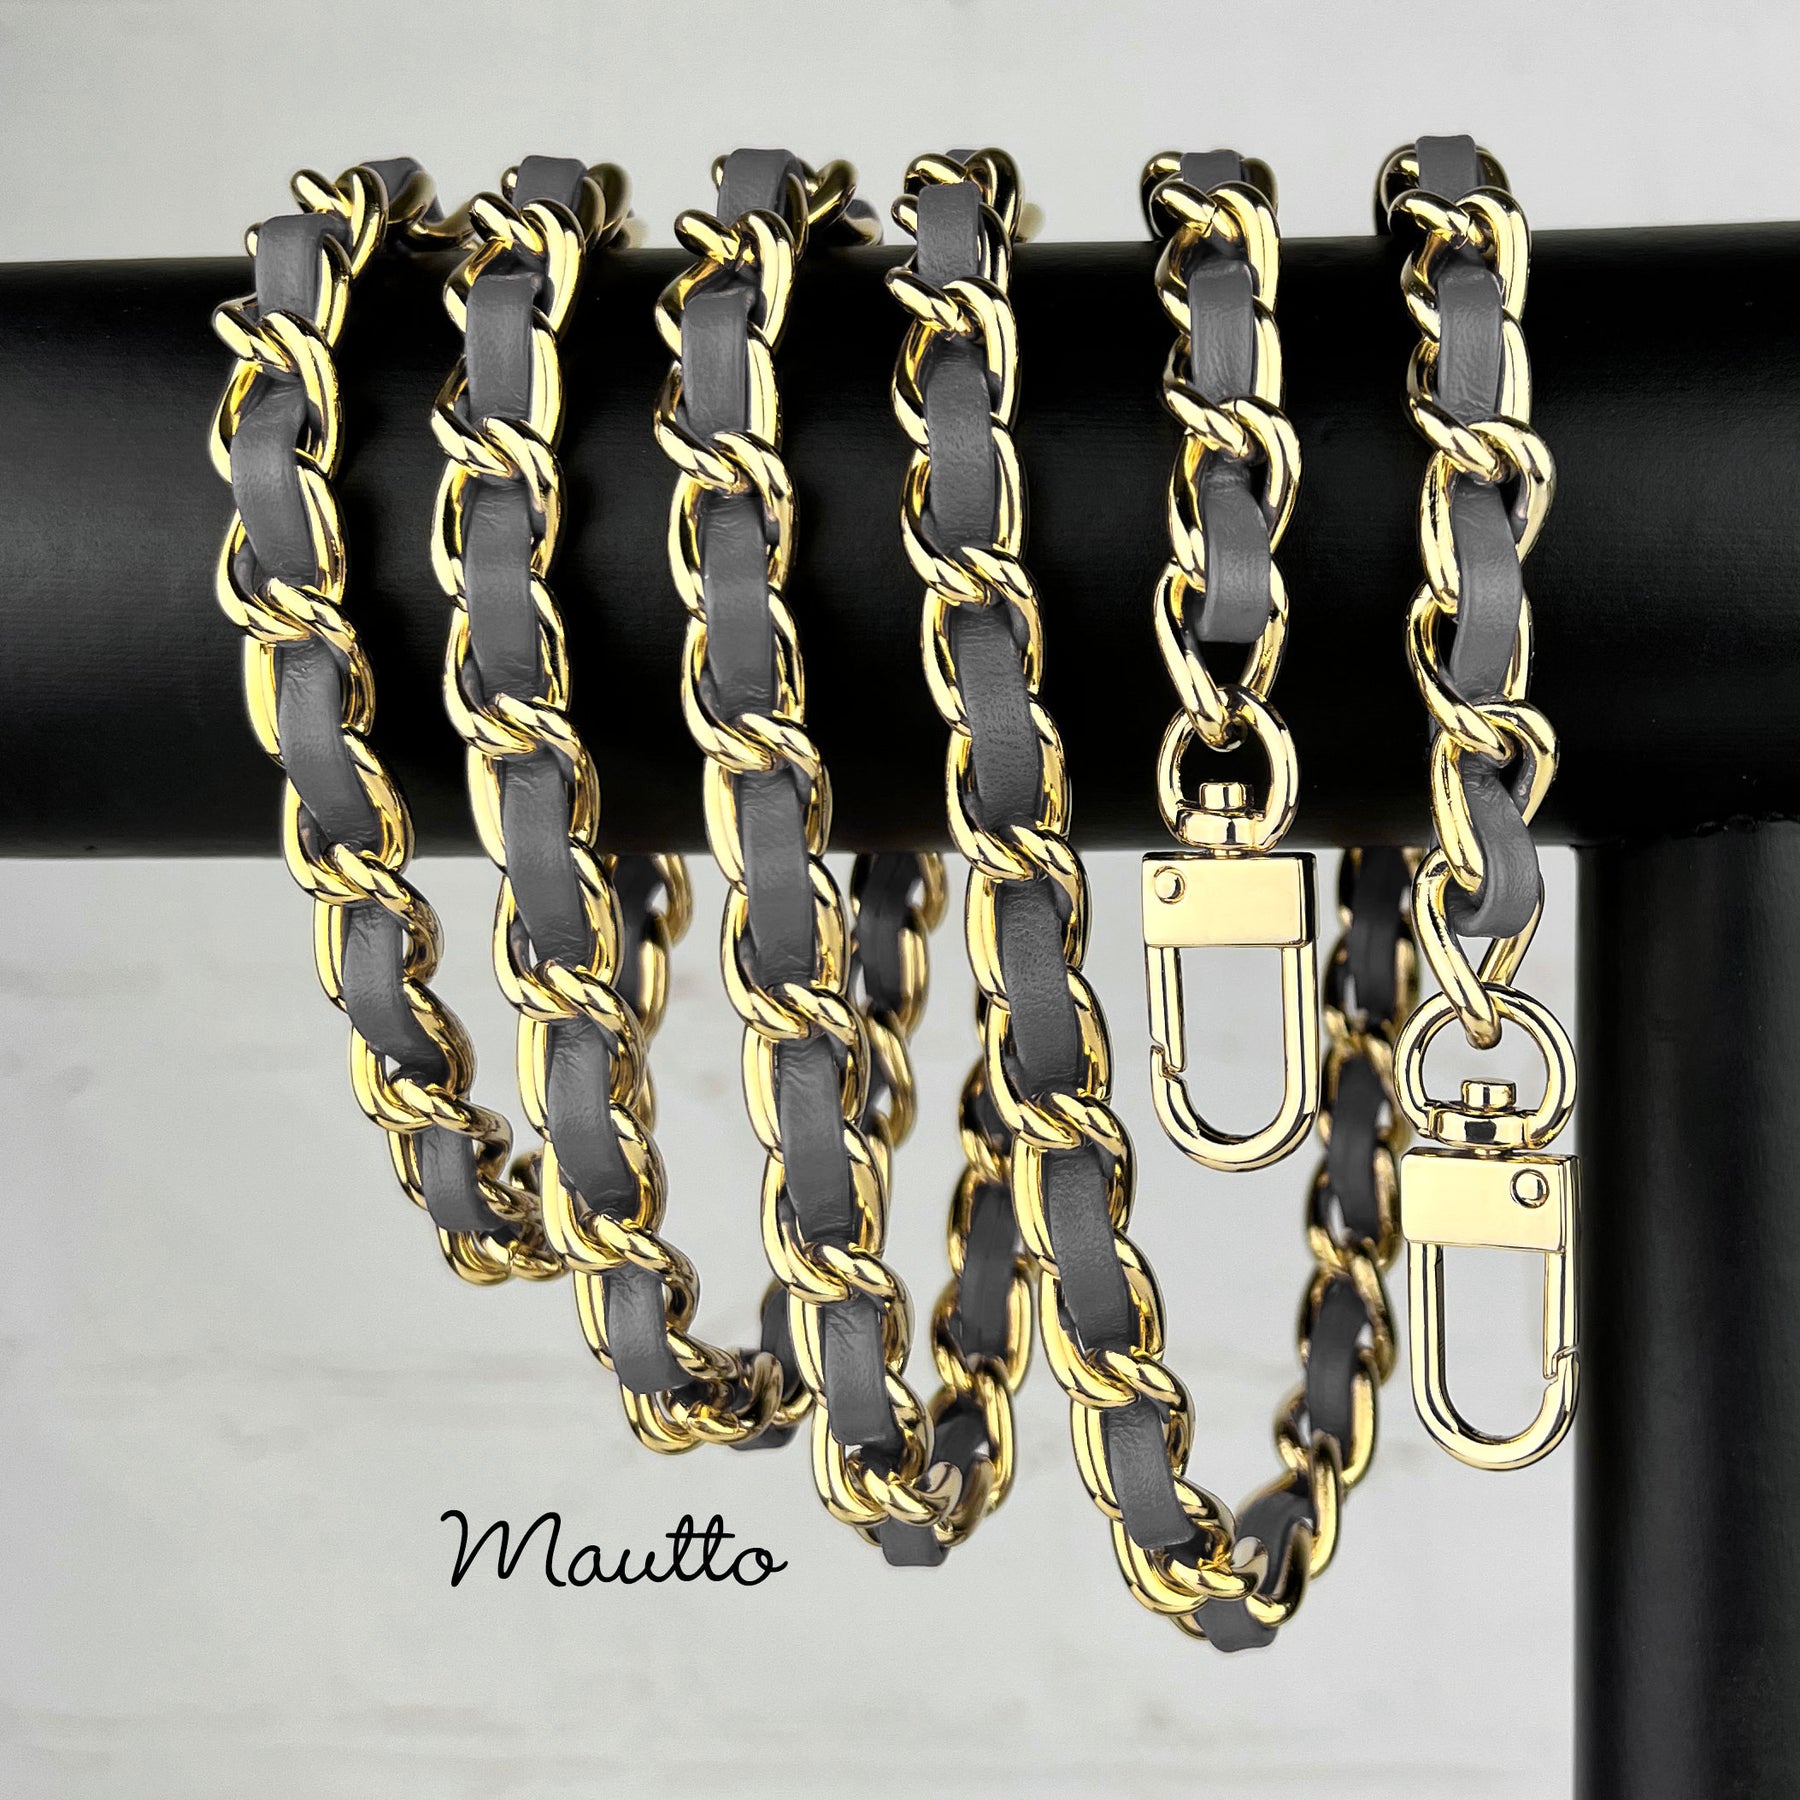 Classic NICKEL Chain Bag Strap with Leather Weaved Through - Choice of  Leather, Length & Hooks, Mautto Handbags